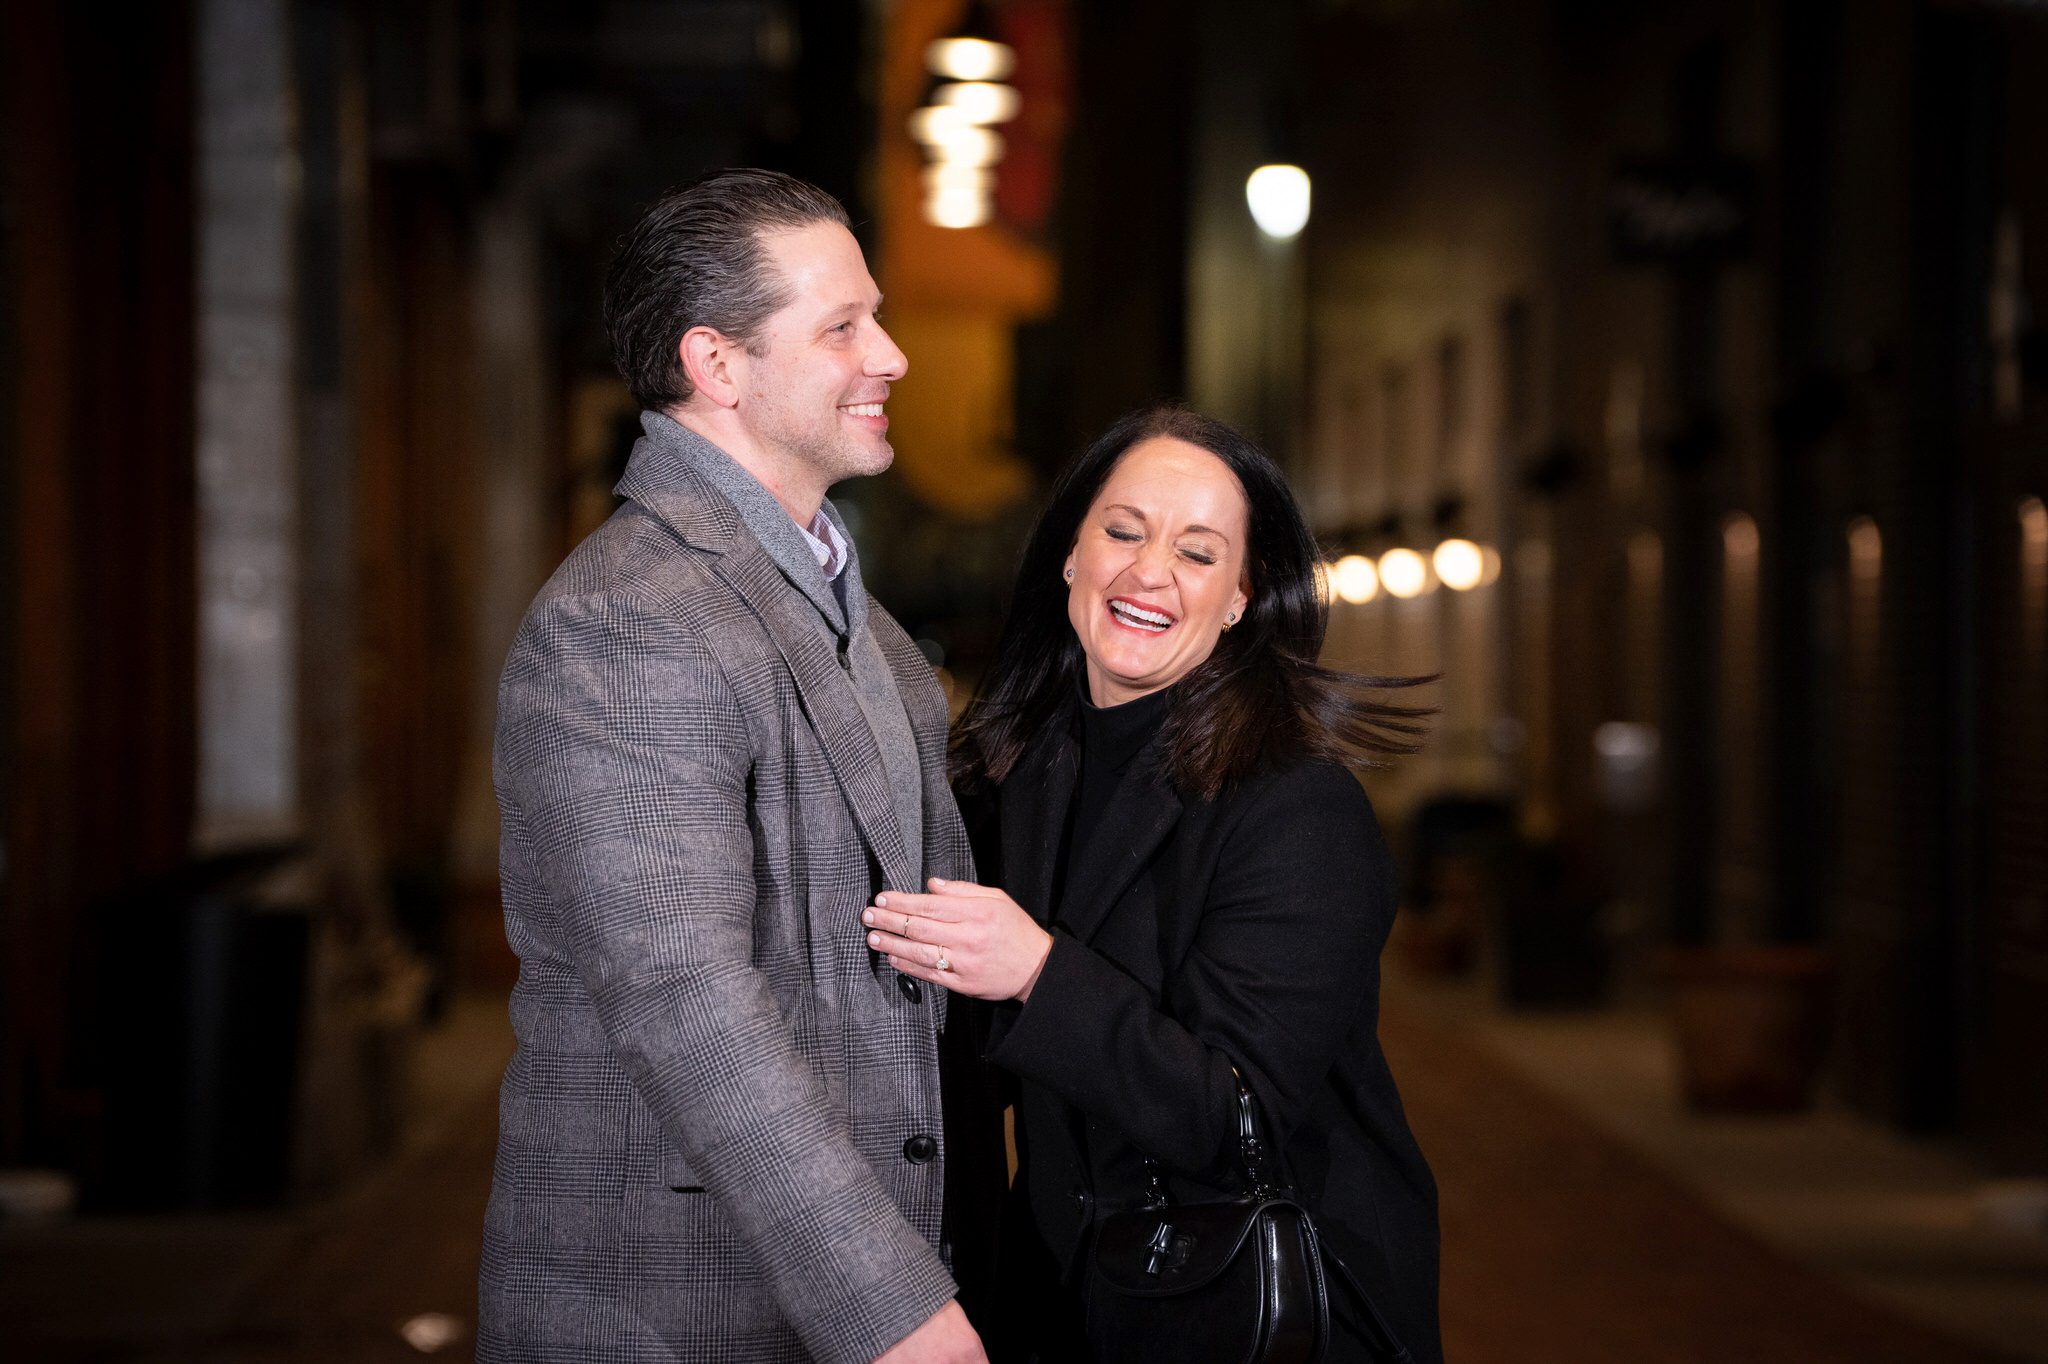 A fiance reacts and laughs after becoming engaged during a proposal in Parker's Alley.